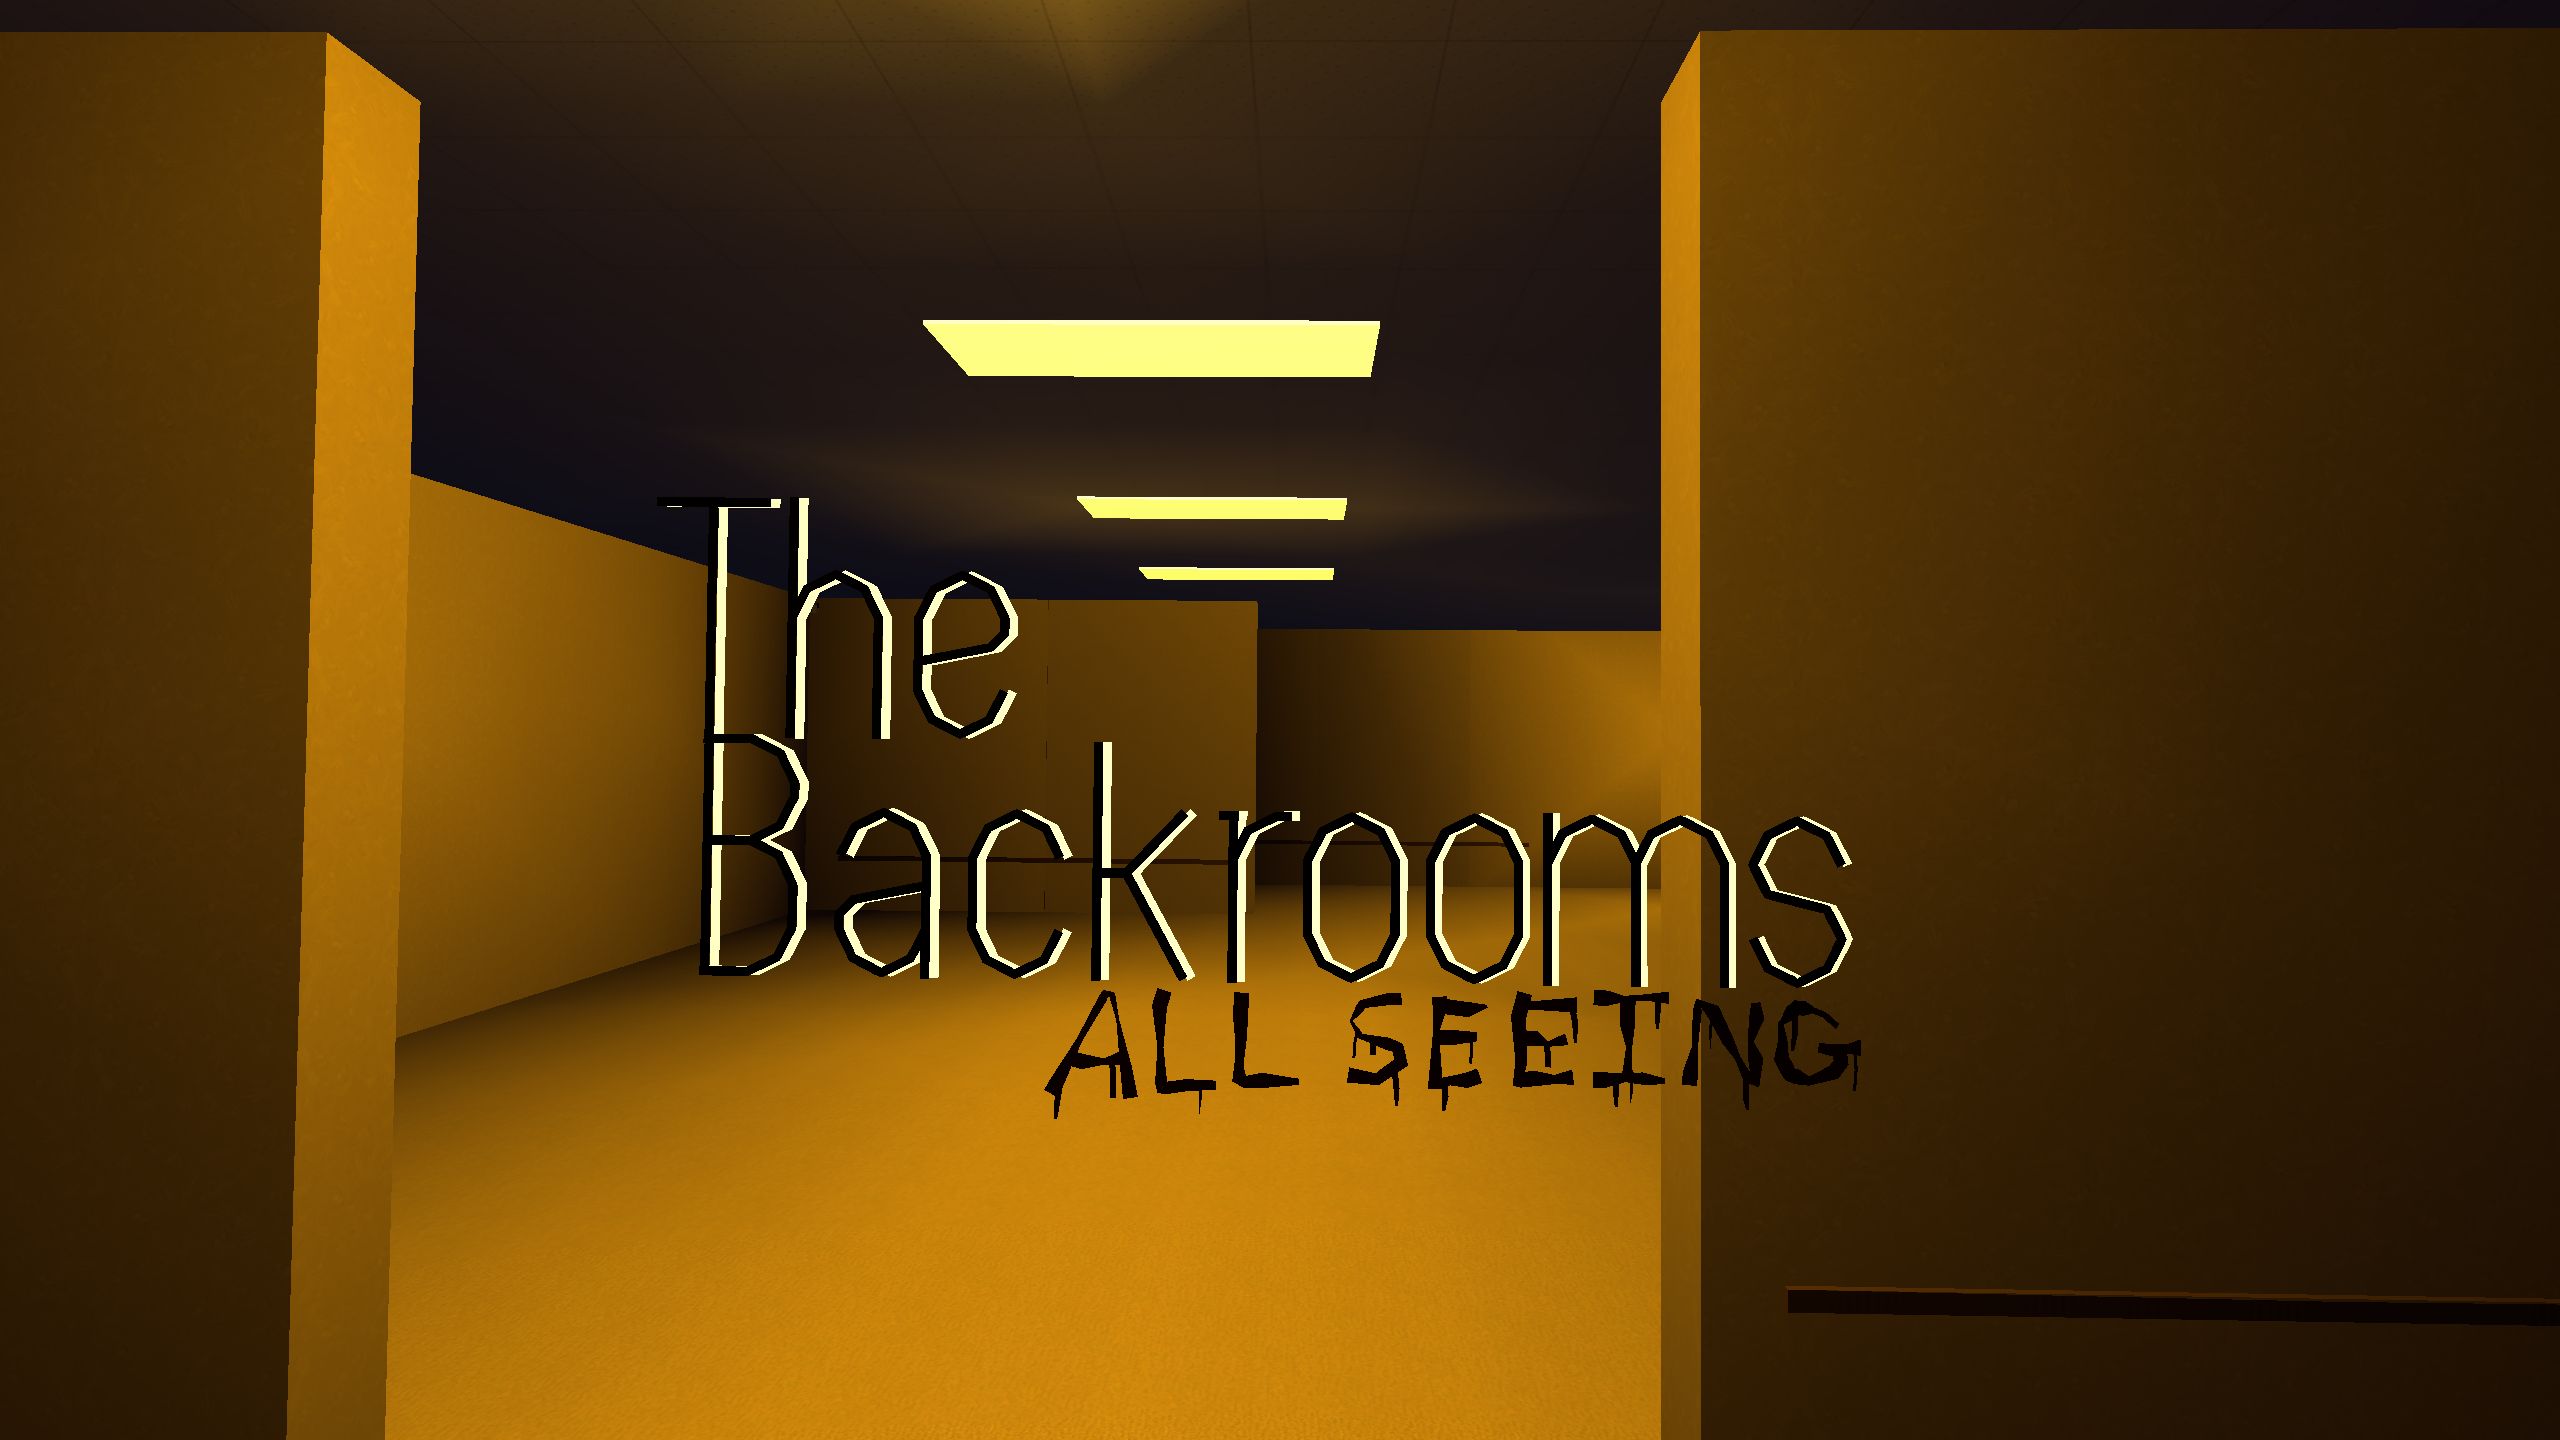 Every secret level of The Backrooms (UPDATED VERSION!) 